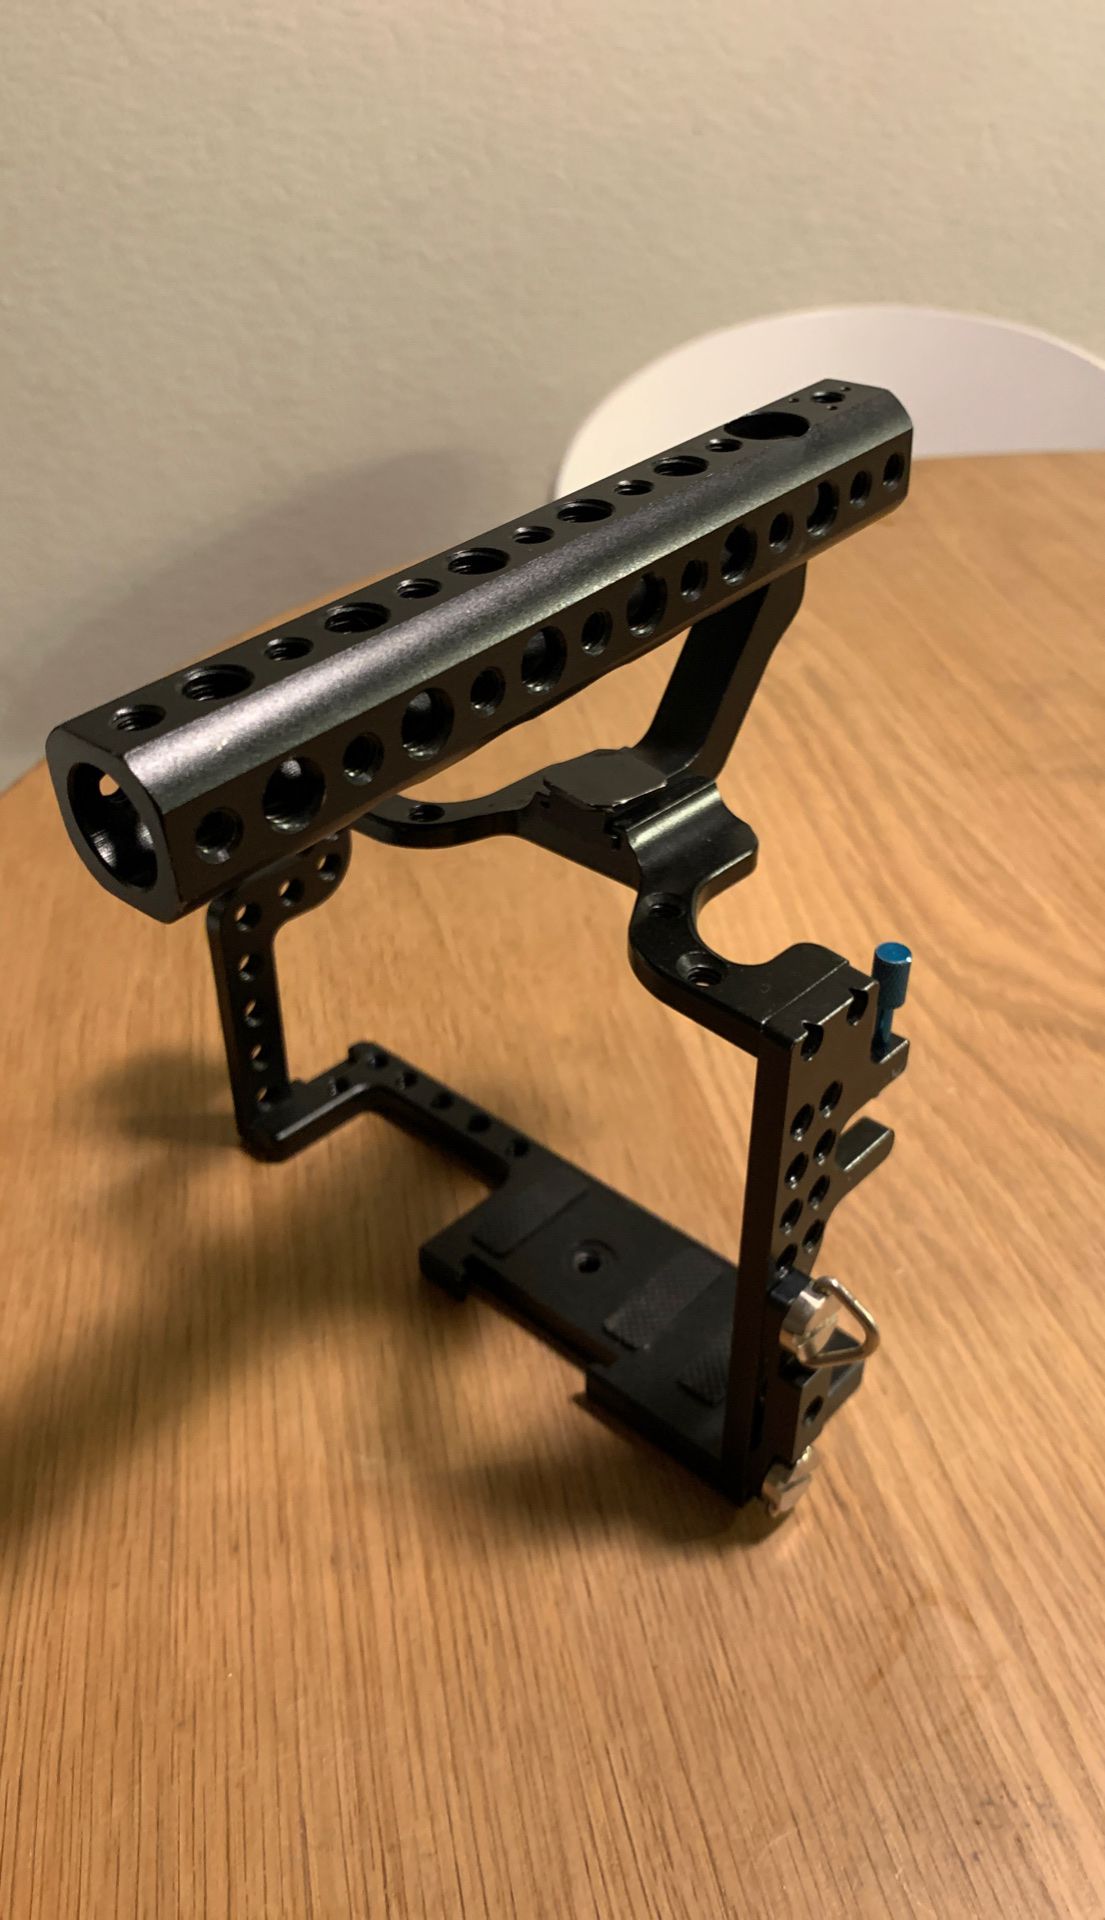 Gh4 video cage